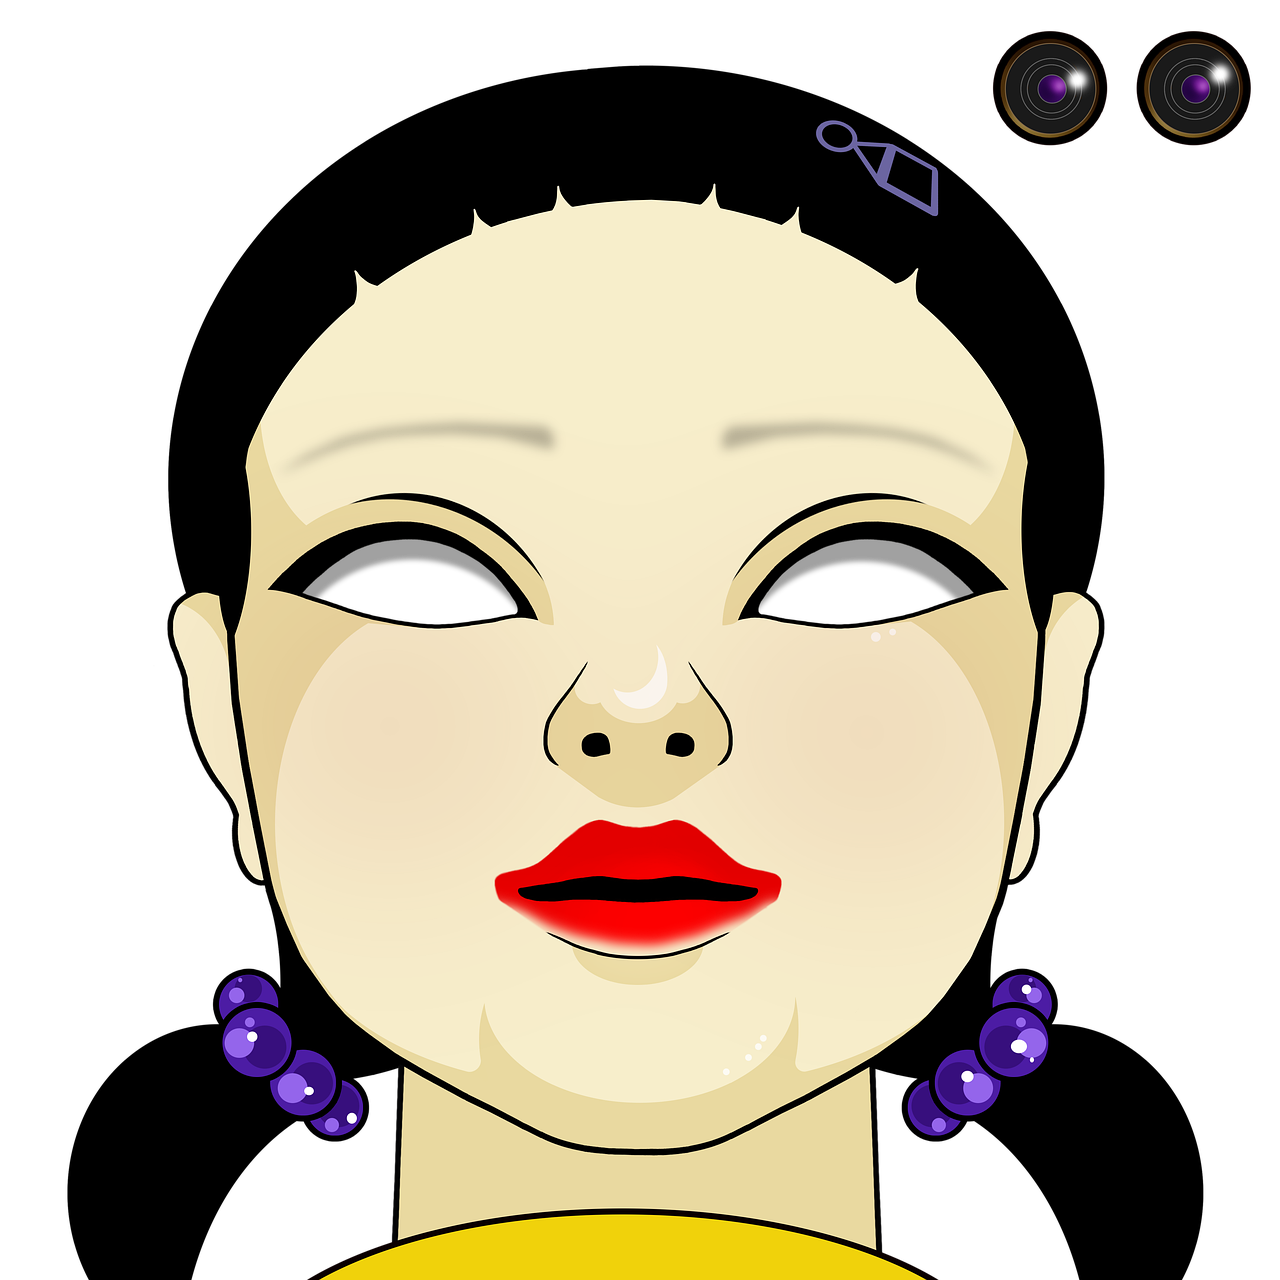 a woman with purple earrings and a yellow shirt, inspired by Ayako Rokkaku, plastic doll, created in adobe illustrator, black dress : : symmetrical face, nighttime